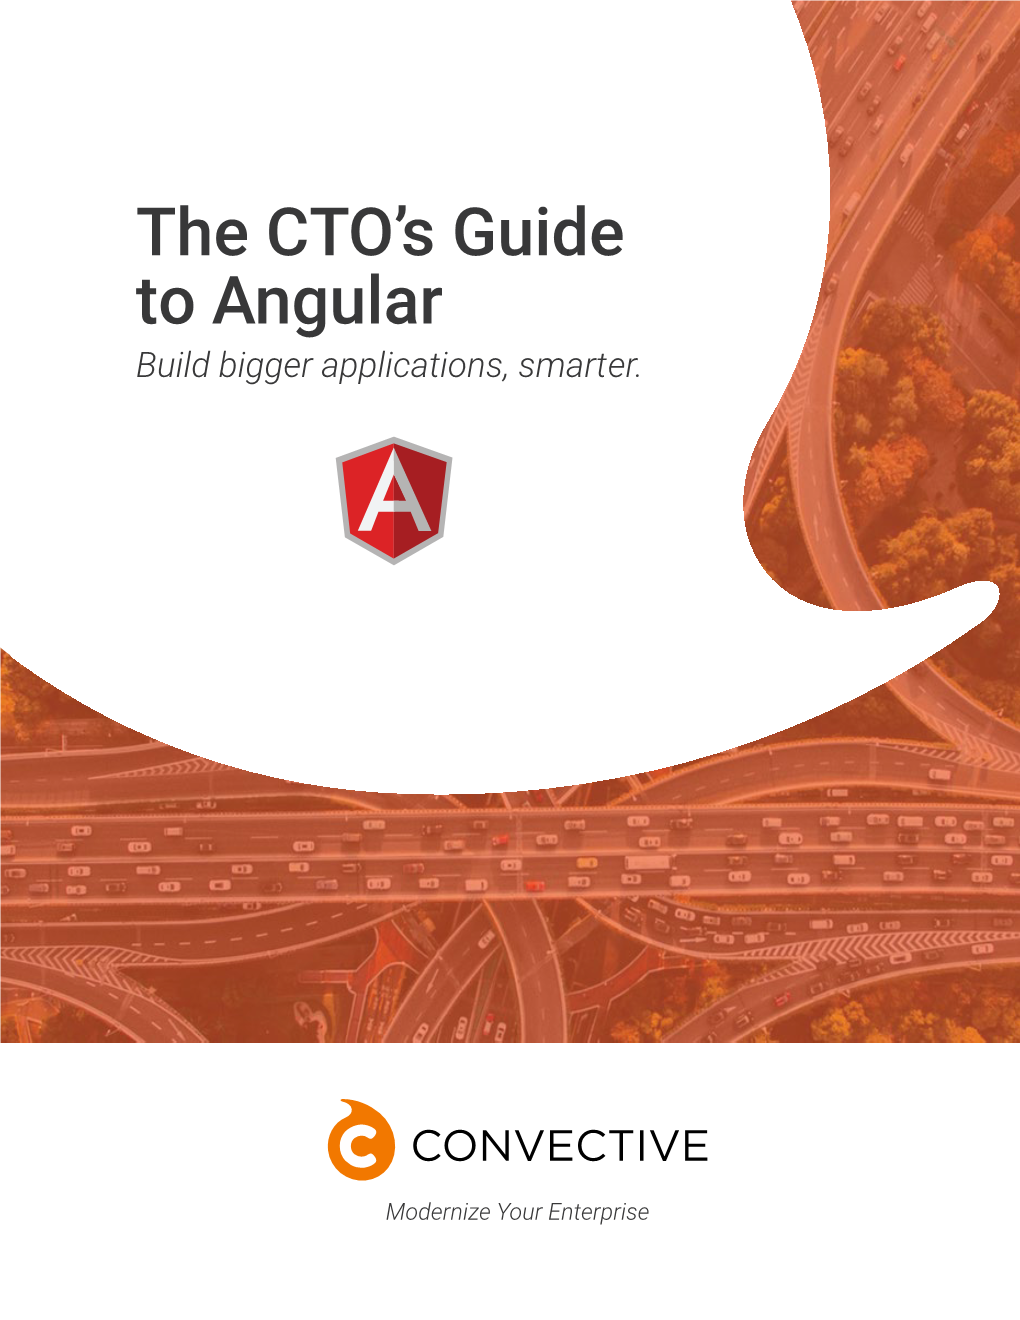 The CTO's Guide to Angular